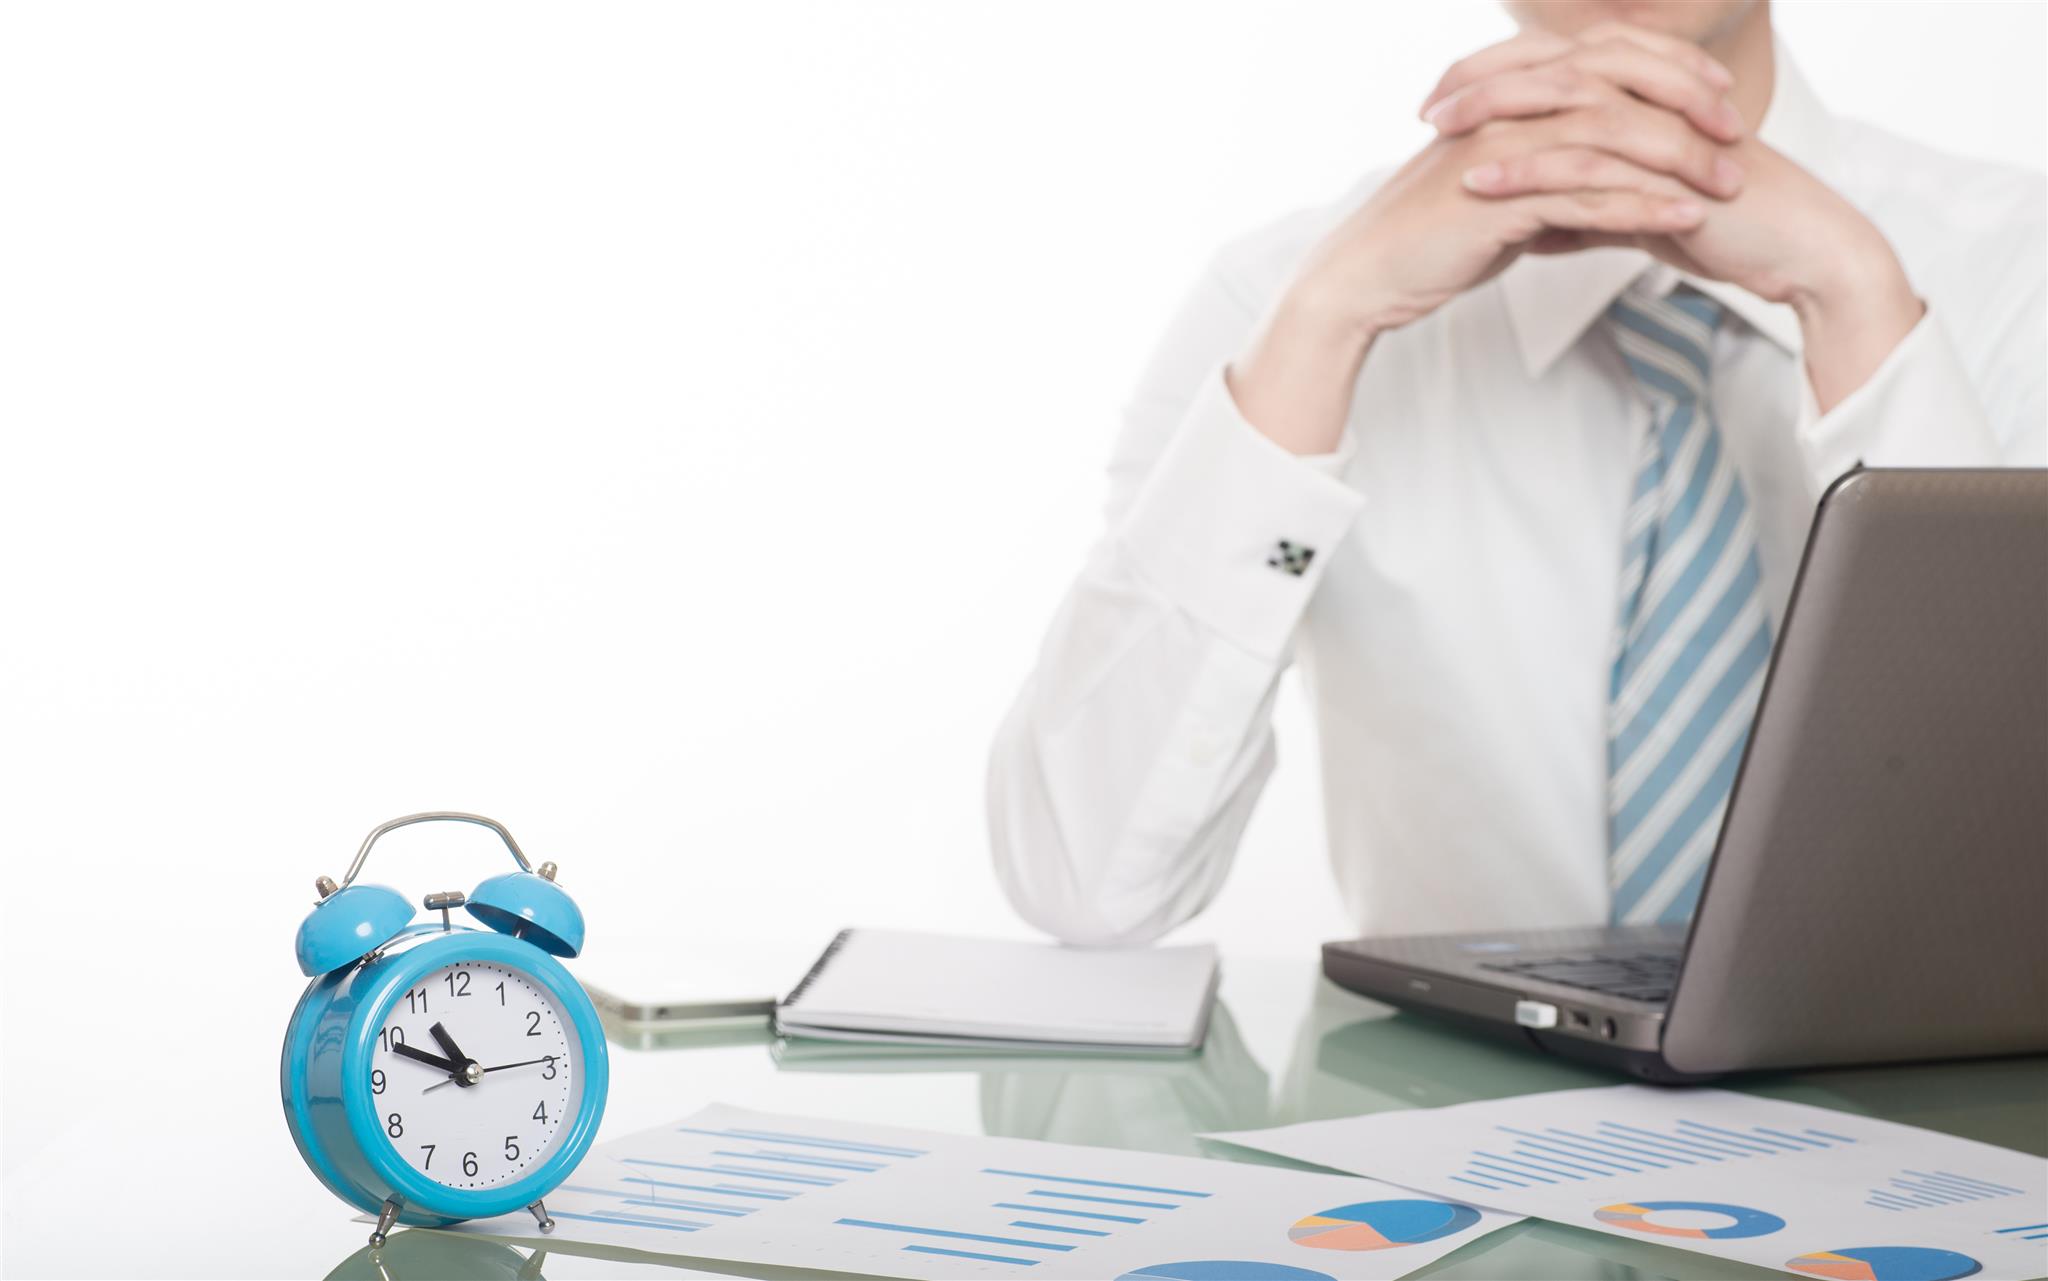 Why Your Business Needs an Effective Time Management Strategy